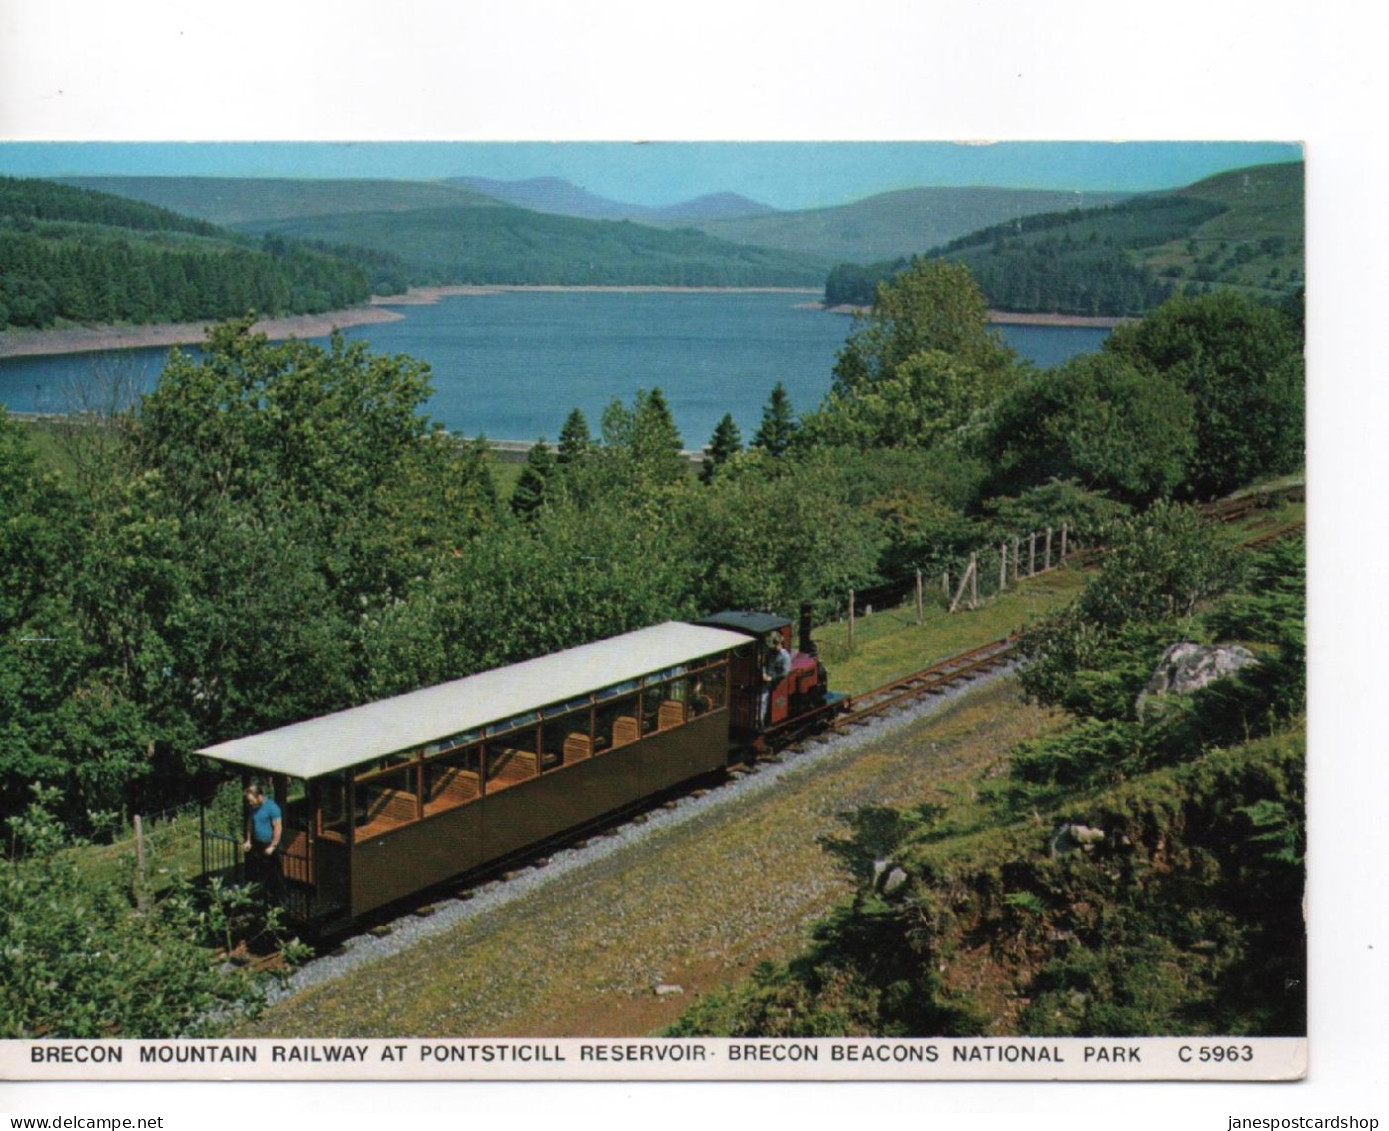 BRECON MOUNTAIN RAILWAY AT PONTSTICILL RESERVOIR - BRECON BEACONS NATIONAL PARK - WALES - Breconshire